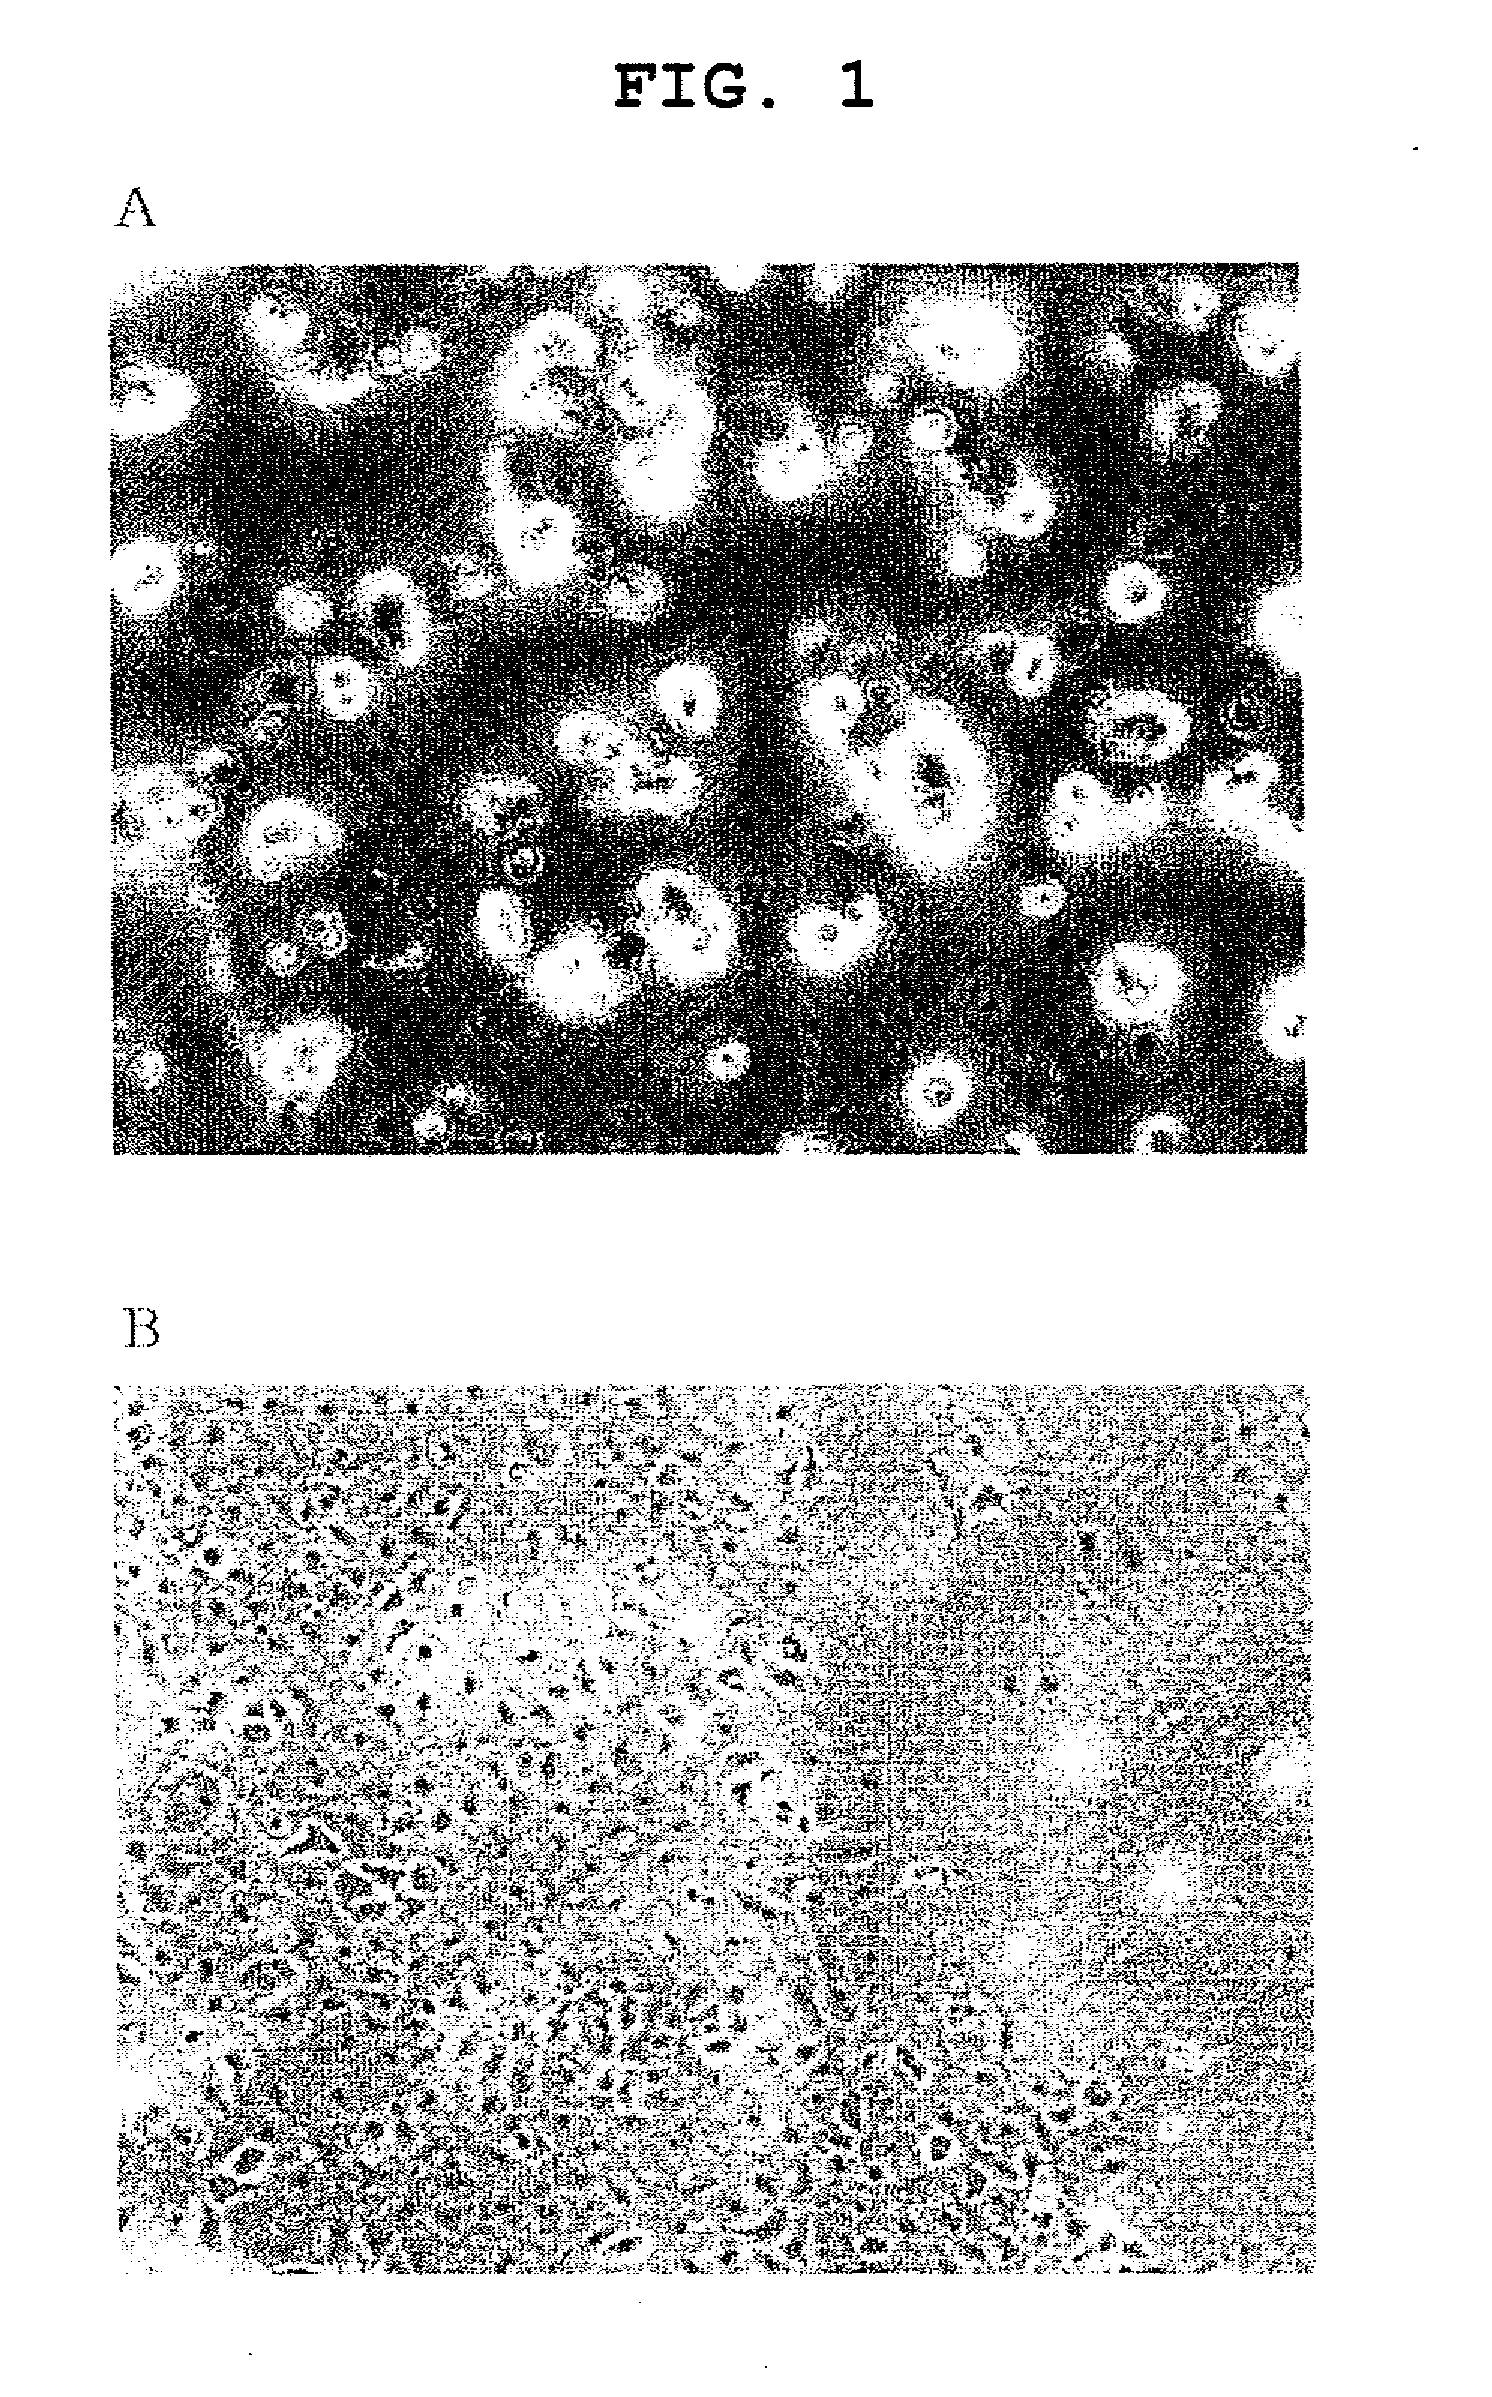 Agent for promoting corneal endothelial cell adhesion